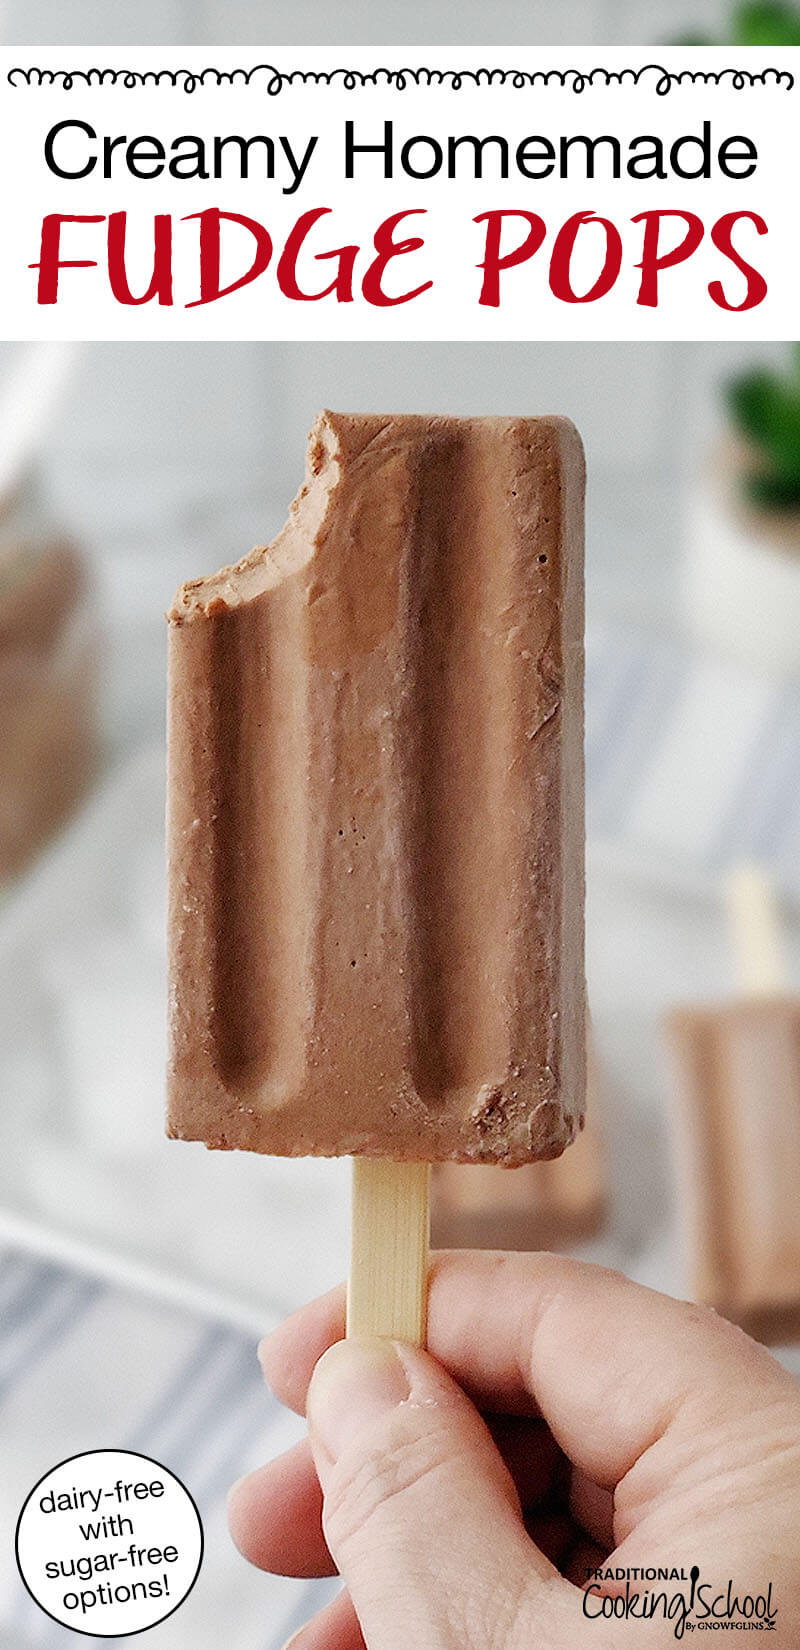 hand holding up a chocolate popsicle with a bite taken out of it. Text overlay says: "Creamy Homemade Fudge Pops (dairy-free with sugar-free options!)"